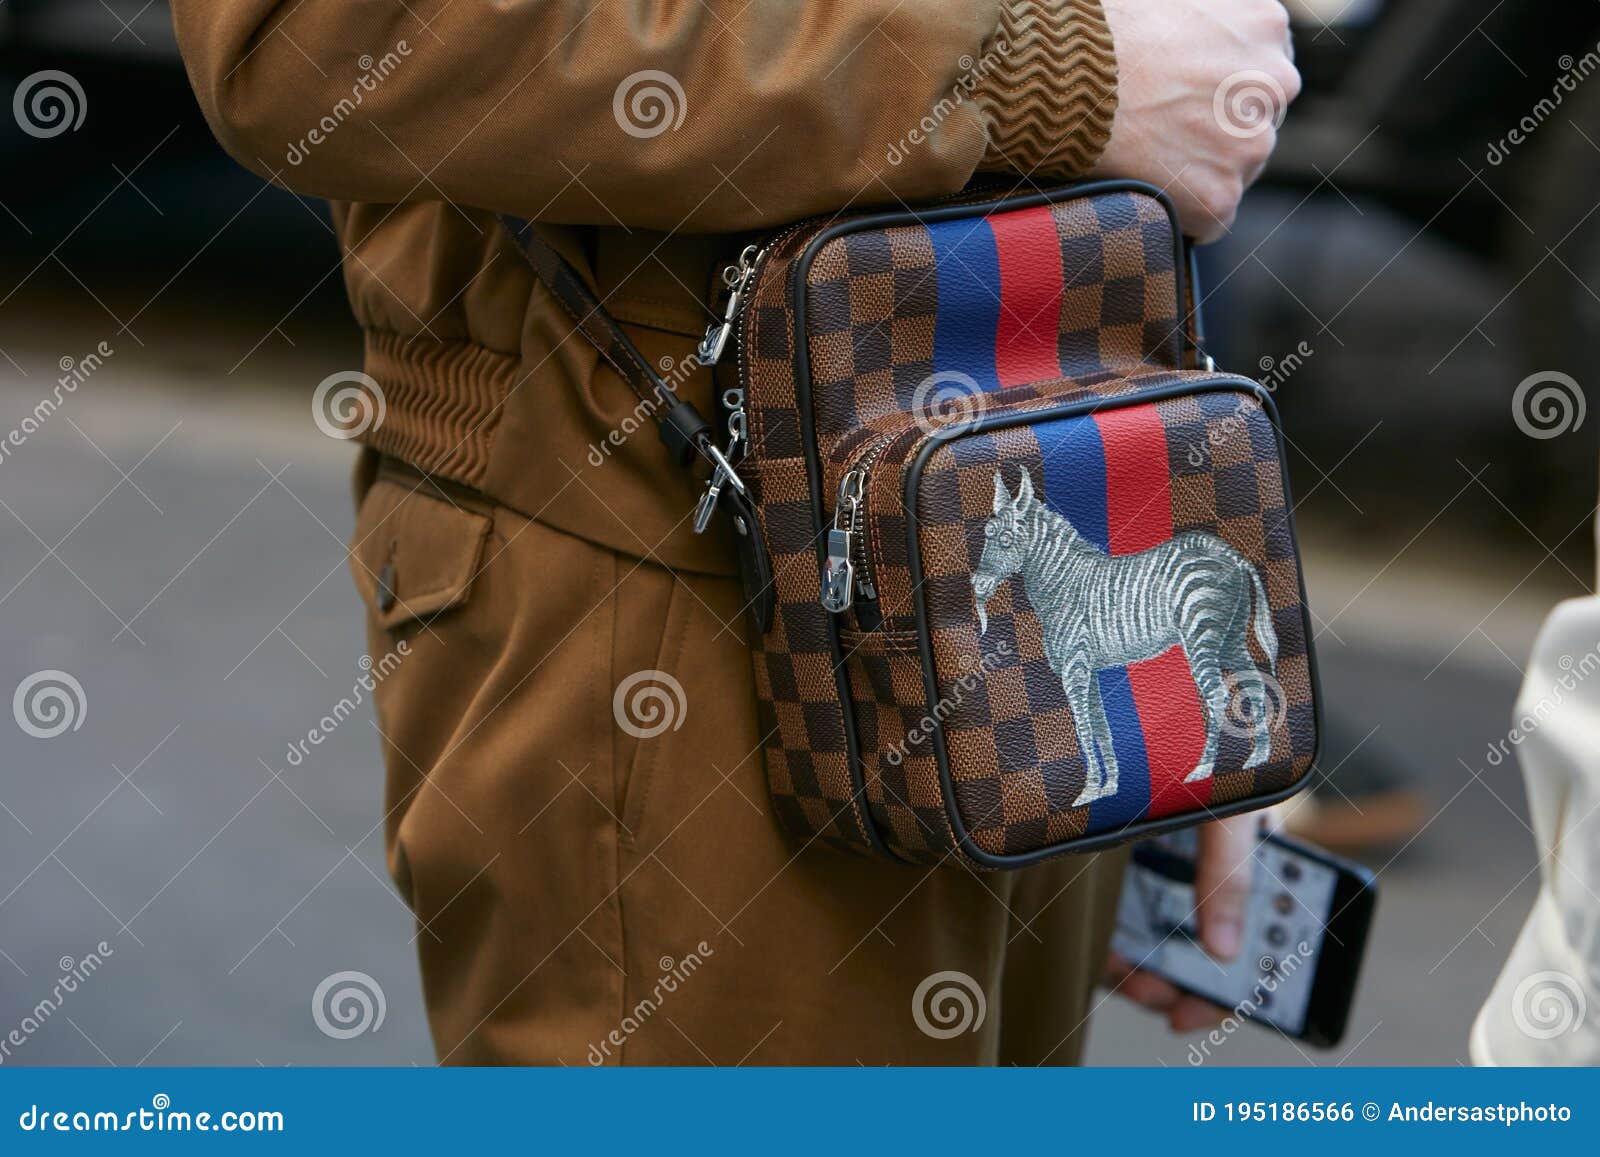 Man with Louis Vuitton Small Bag with Zebra Design before